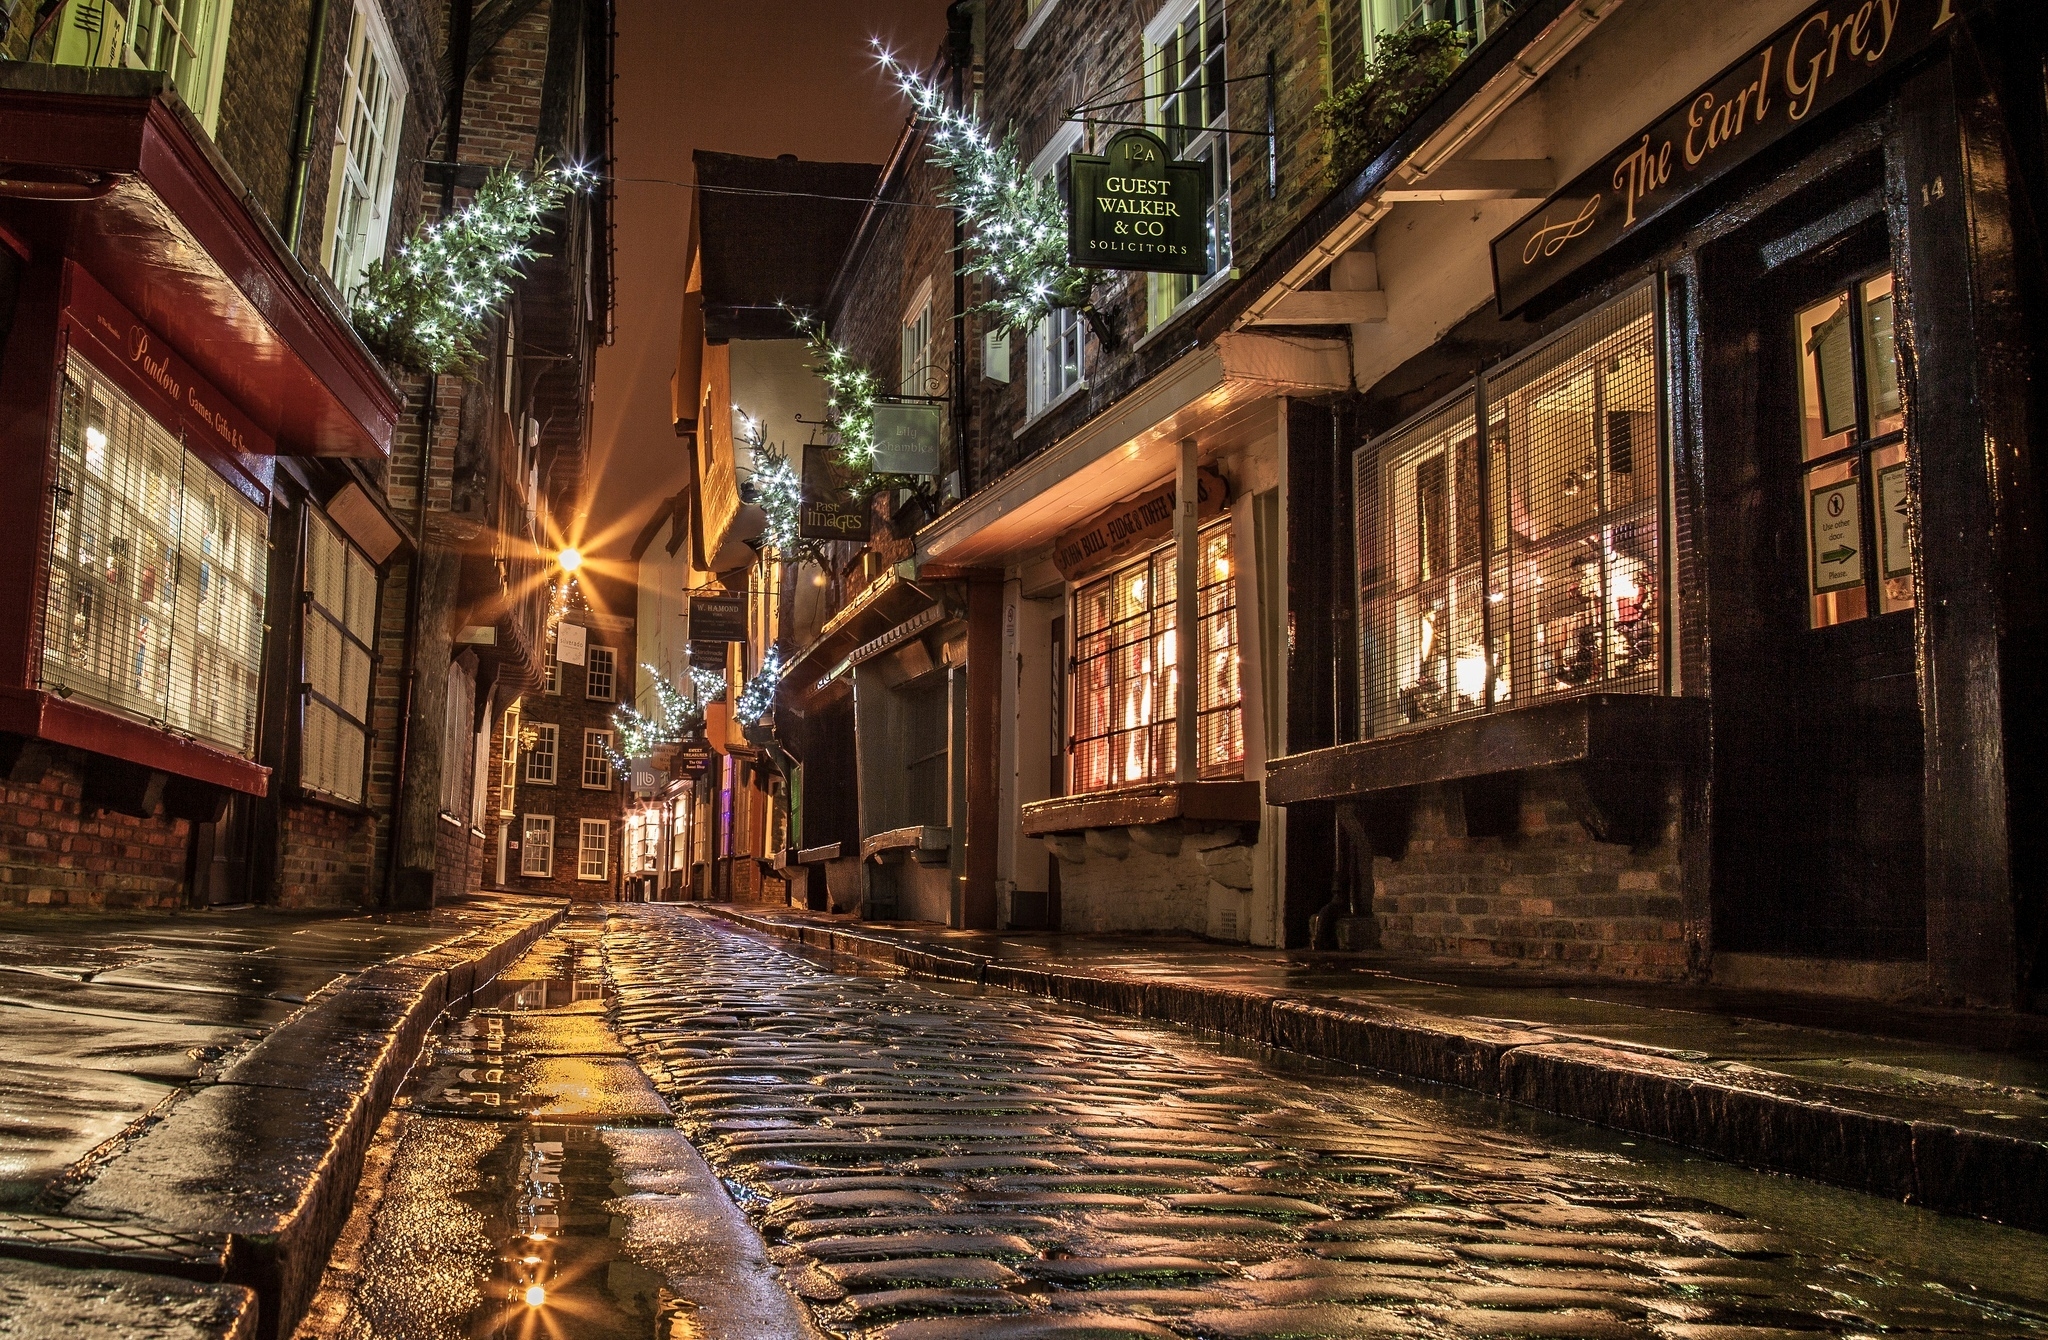 light, new year, street, sett, miscellanea, paving stones, shine, windows, houses, miscellaneous, evening, night, road, christmas, shops, england wallpapers for tablet